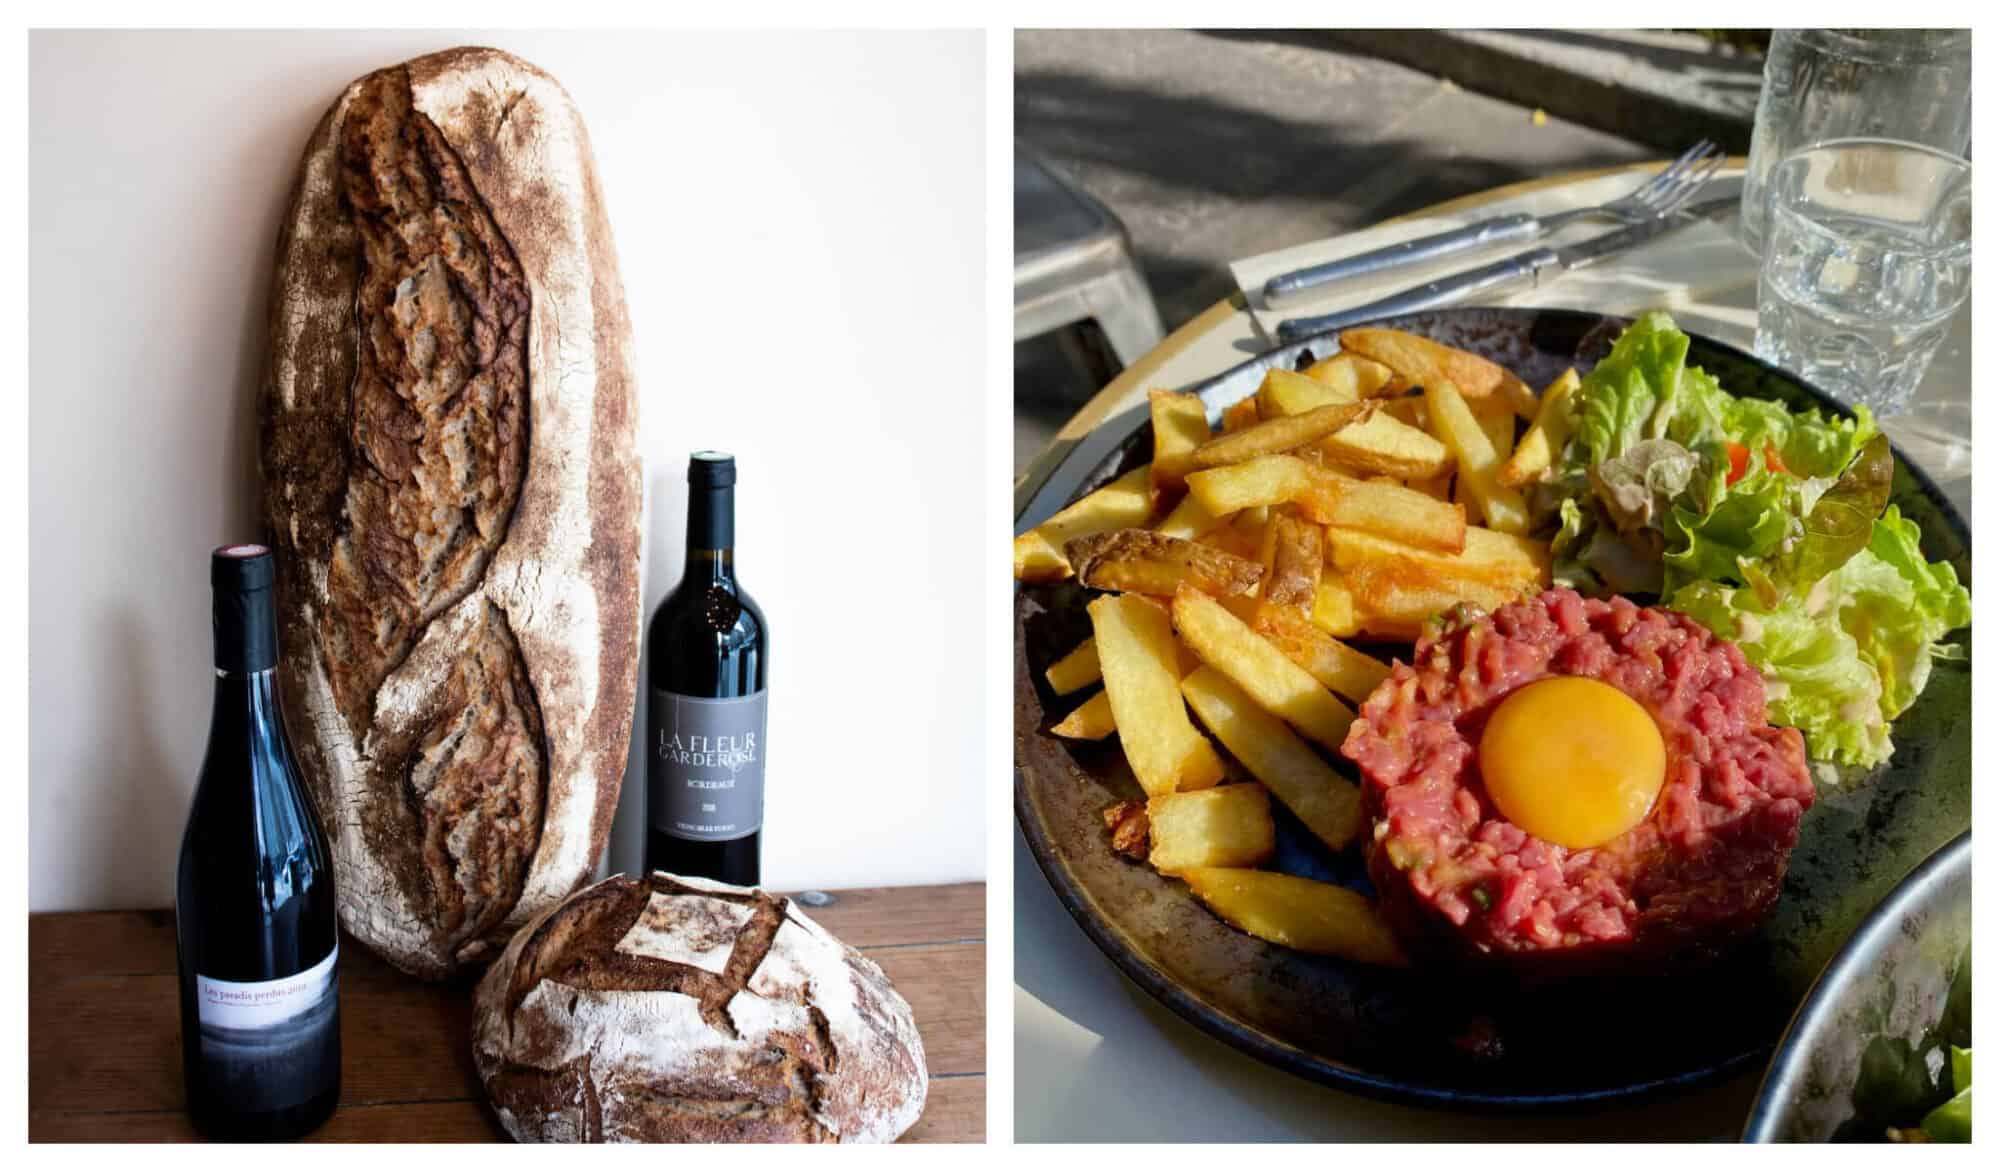 Left: 2 pieces of loaf bread called Pain de Campagne with a bottle of wine at Levain Le Vin in Paris; Right: A beef tartare with raw egg dish from Bistrot Smiley